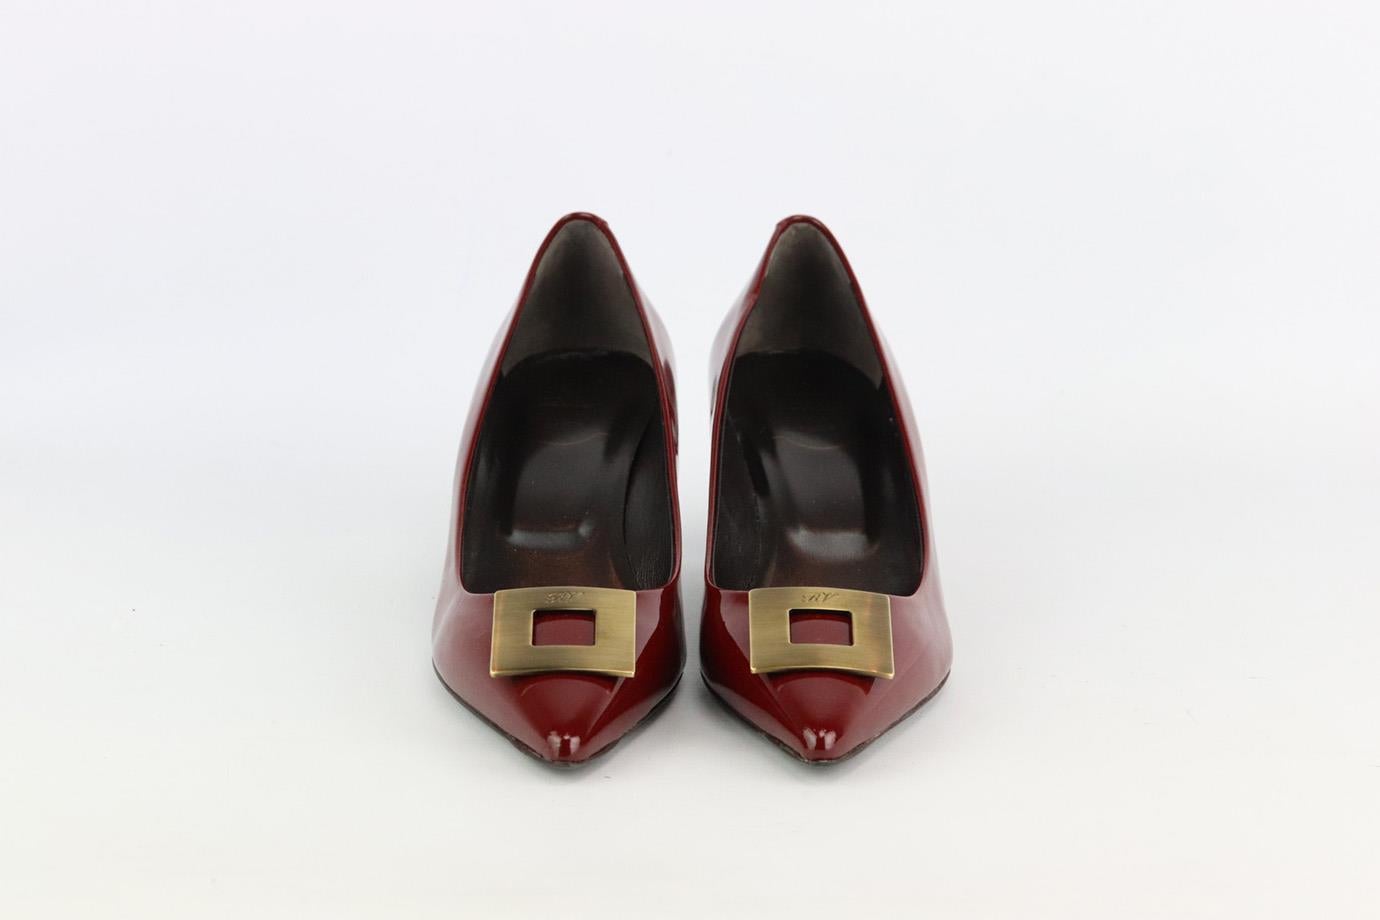 These pumps by Roger Vivier are an elegant re-creation of the founder's original 1965 design, they're made from burgundy patent-leather and embellished with a bronze-tone signature buckle that tops the sharp pointed toe. Heel measures approximately